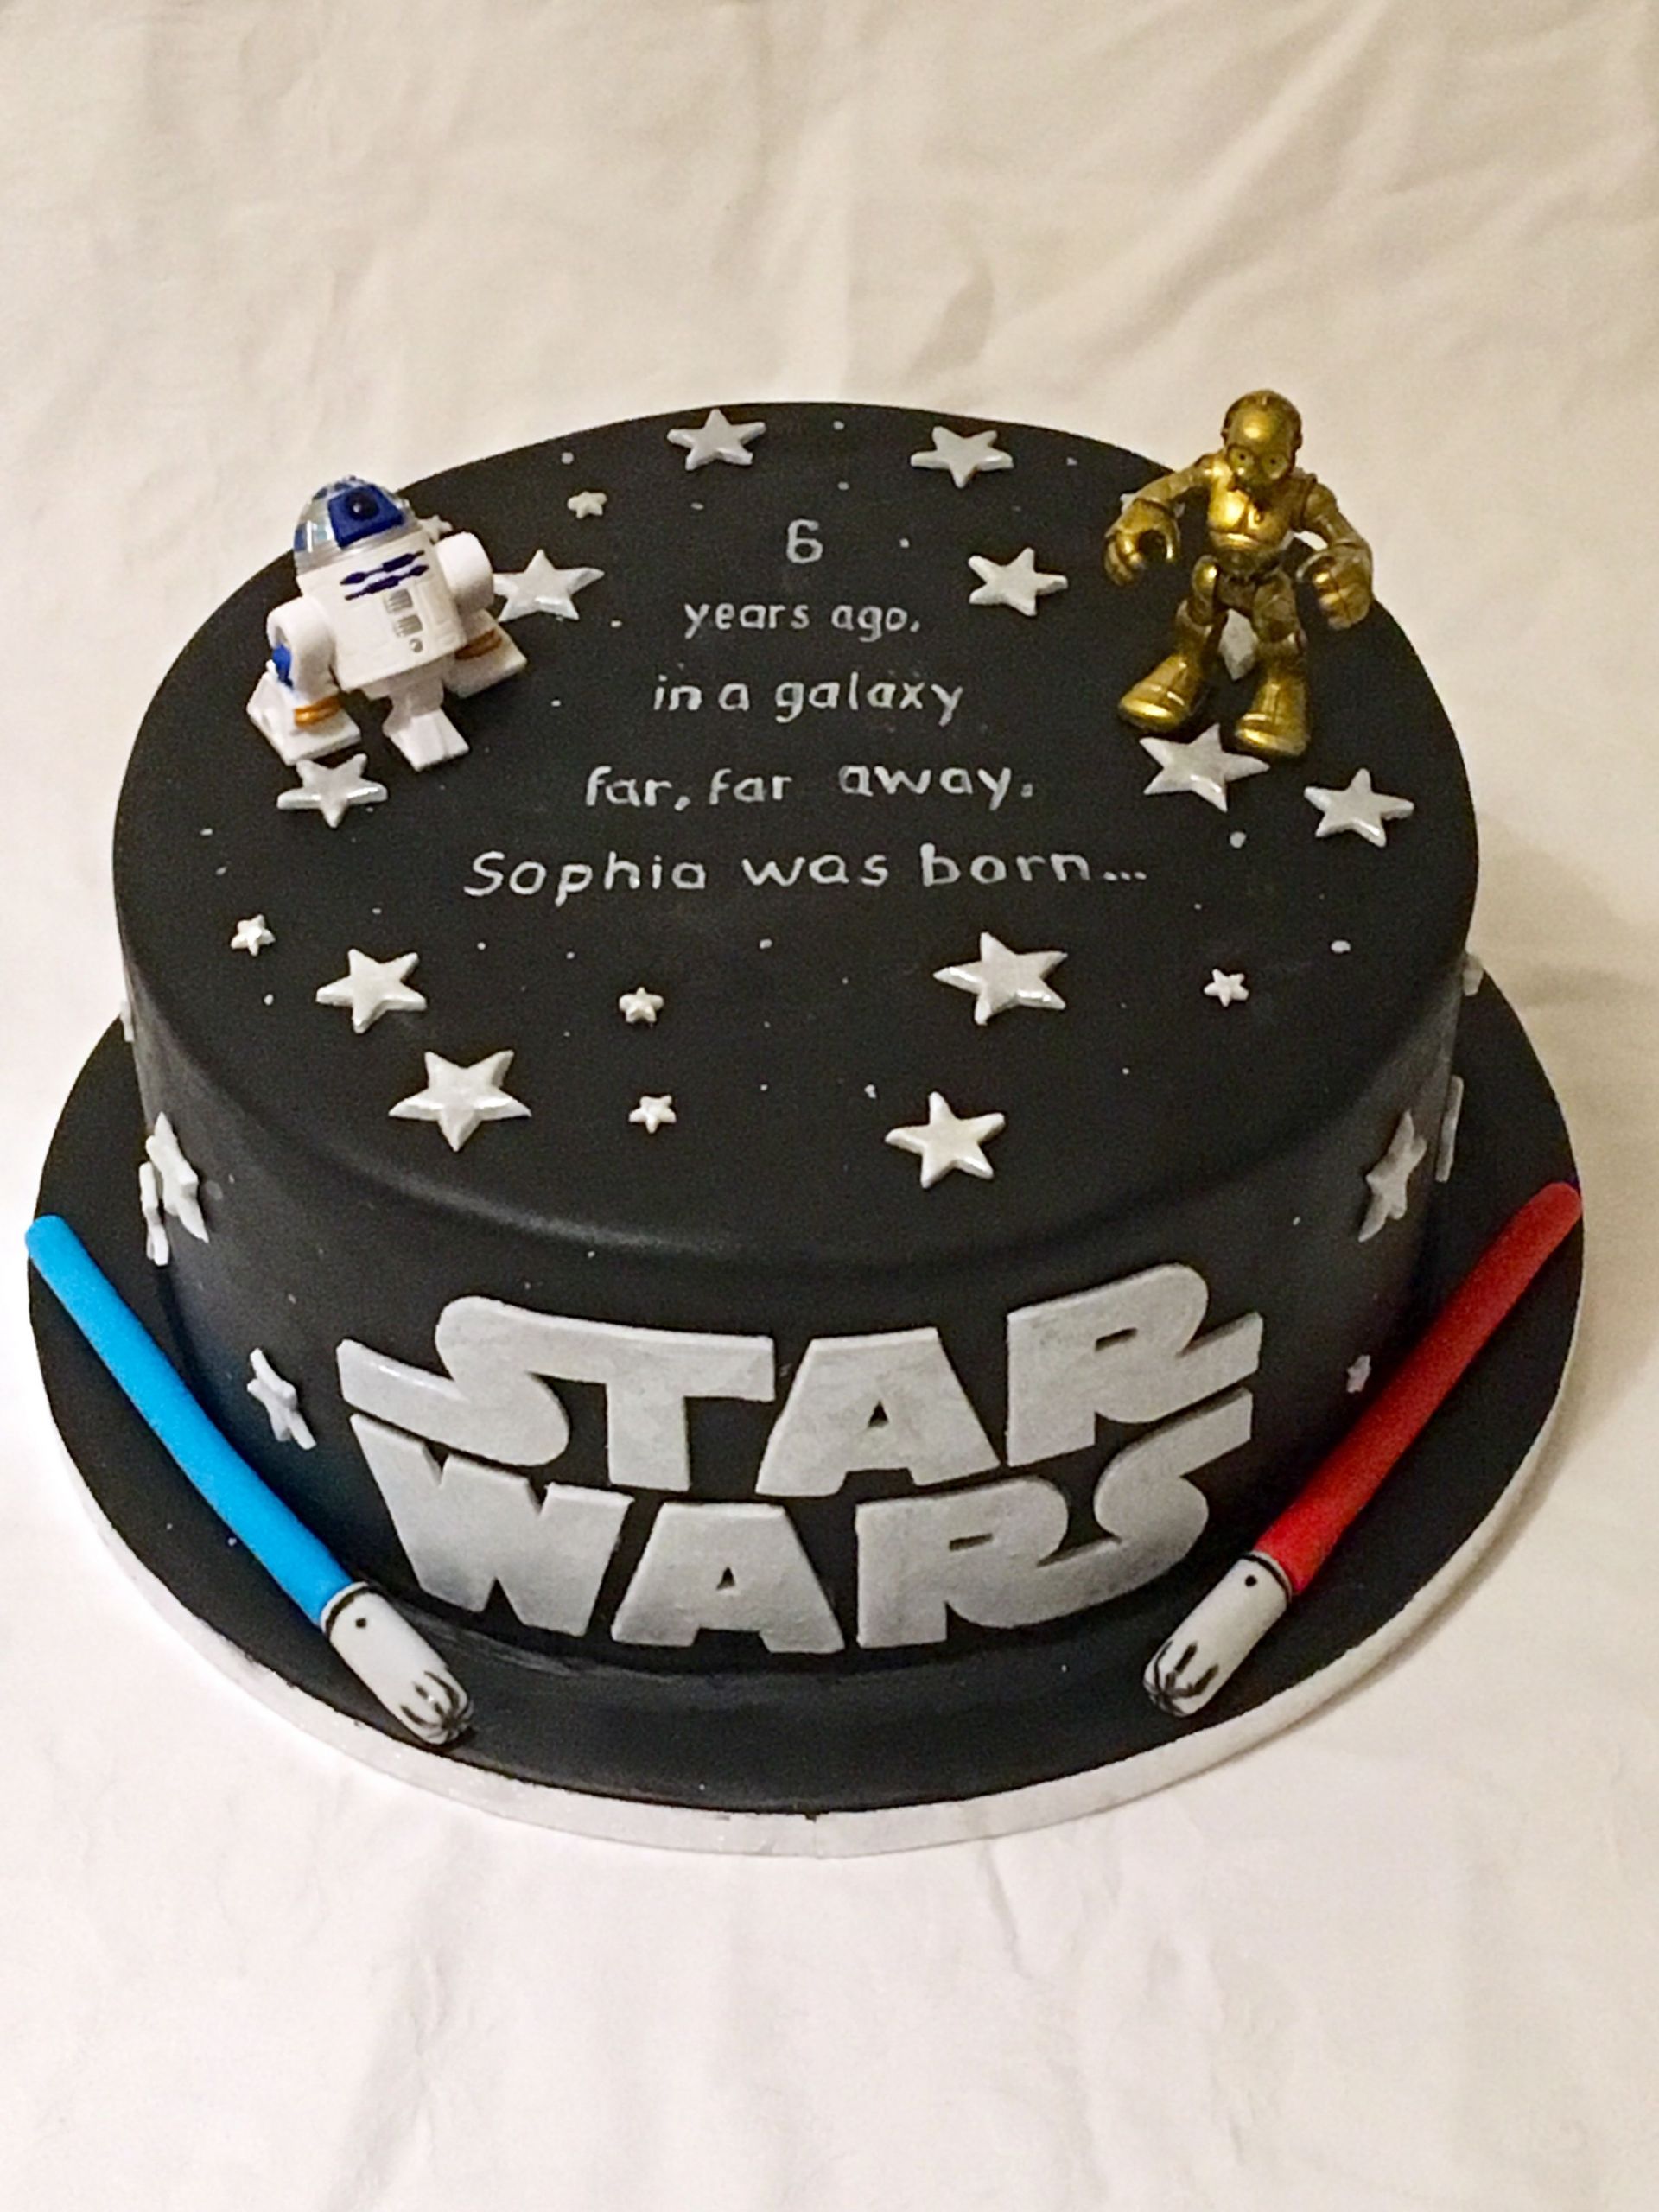 Star Wars Birthday Cake Decorations
 Idea 1 for bday cake also add bb8 in 2019